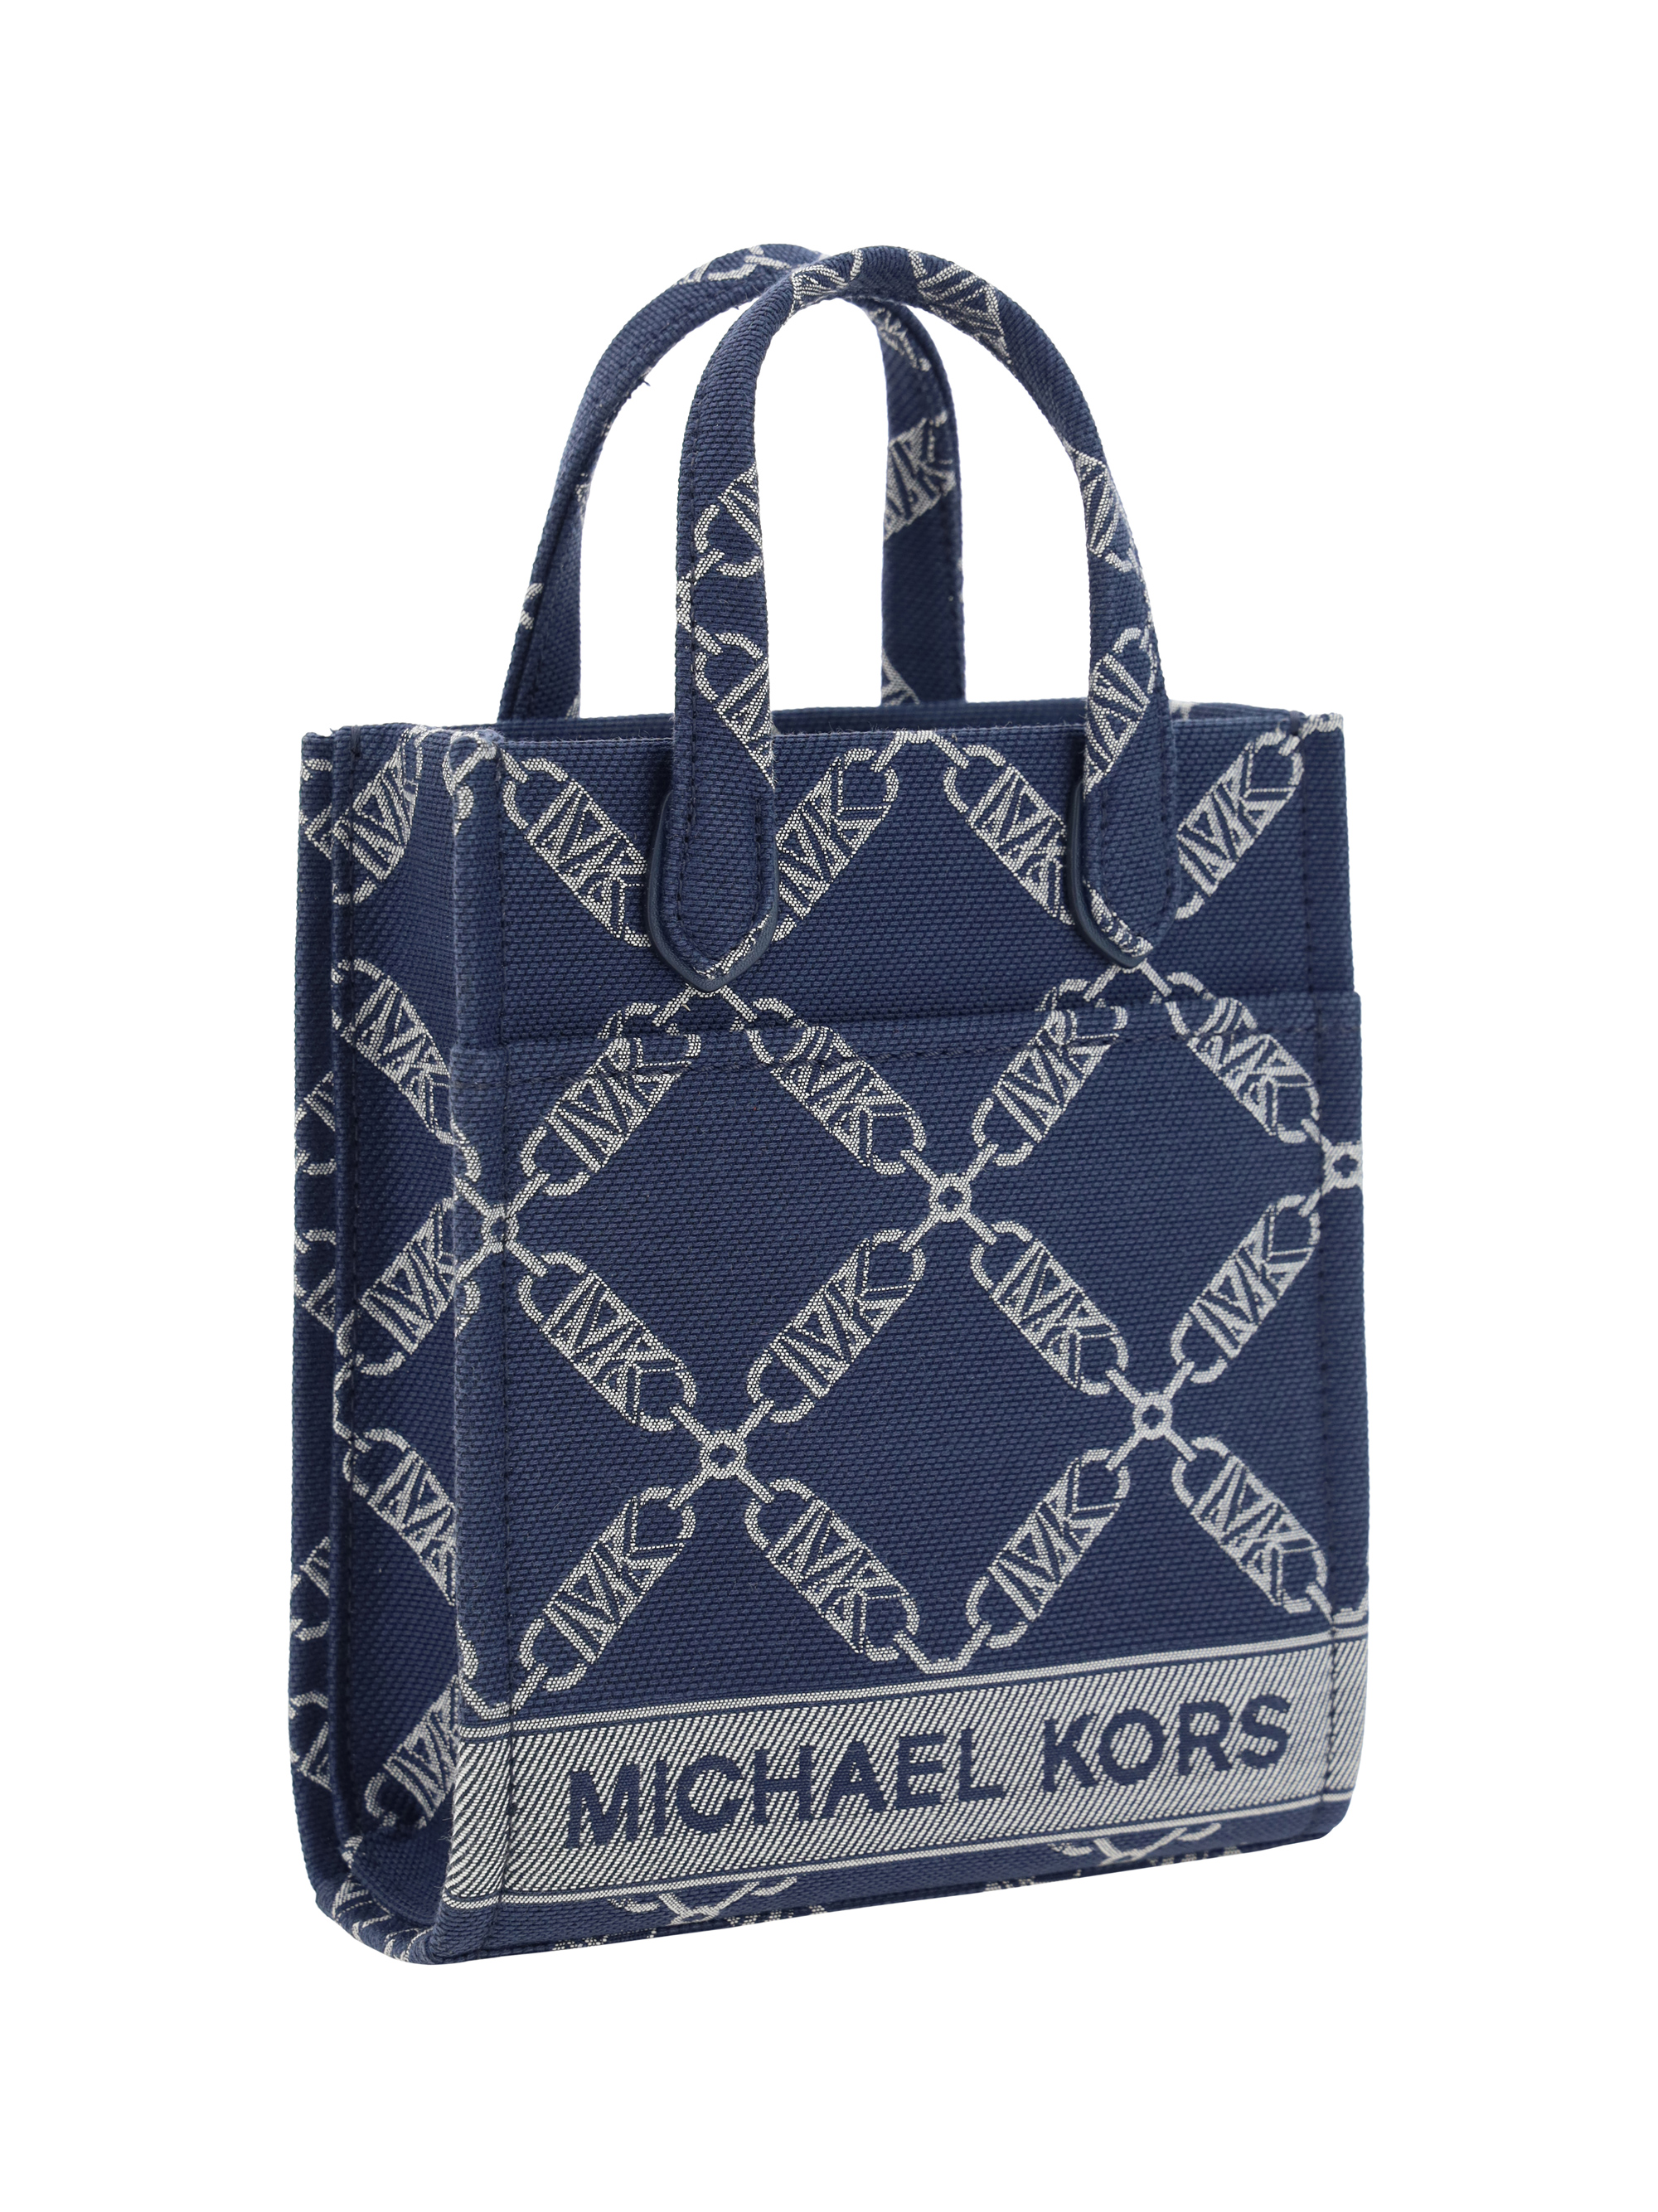 Lv Small Tote Bag Sweden, SAVE 53% 